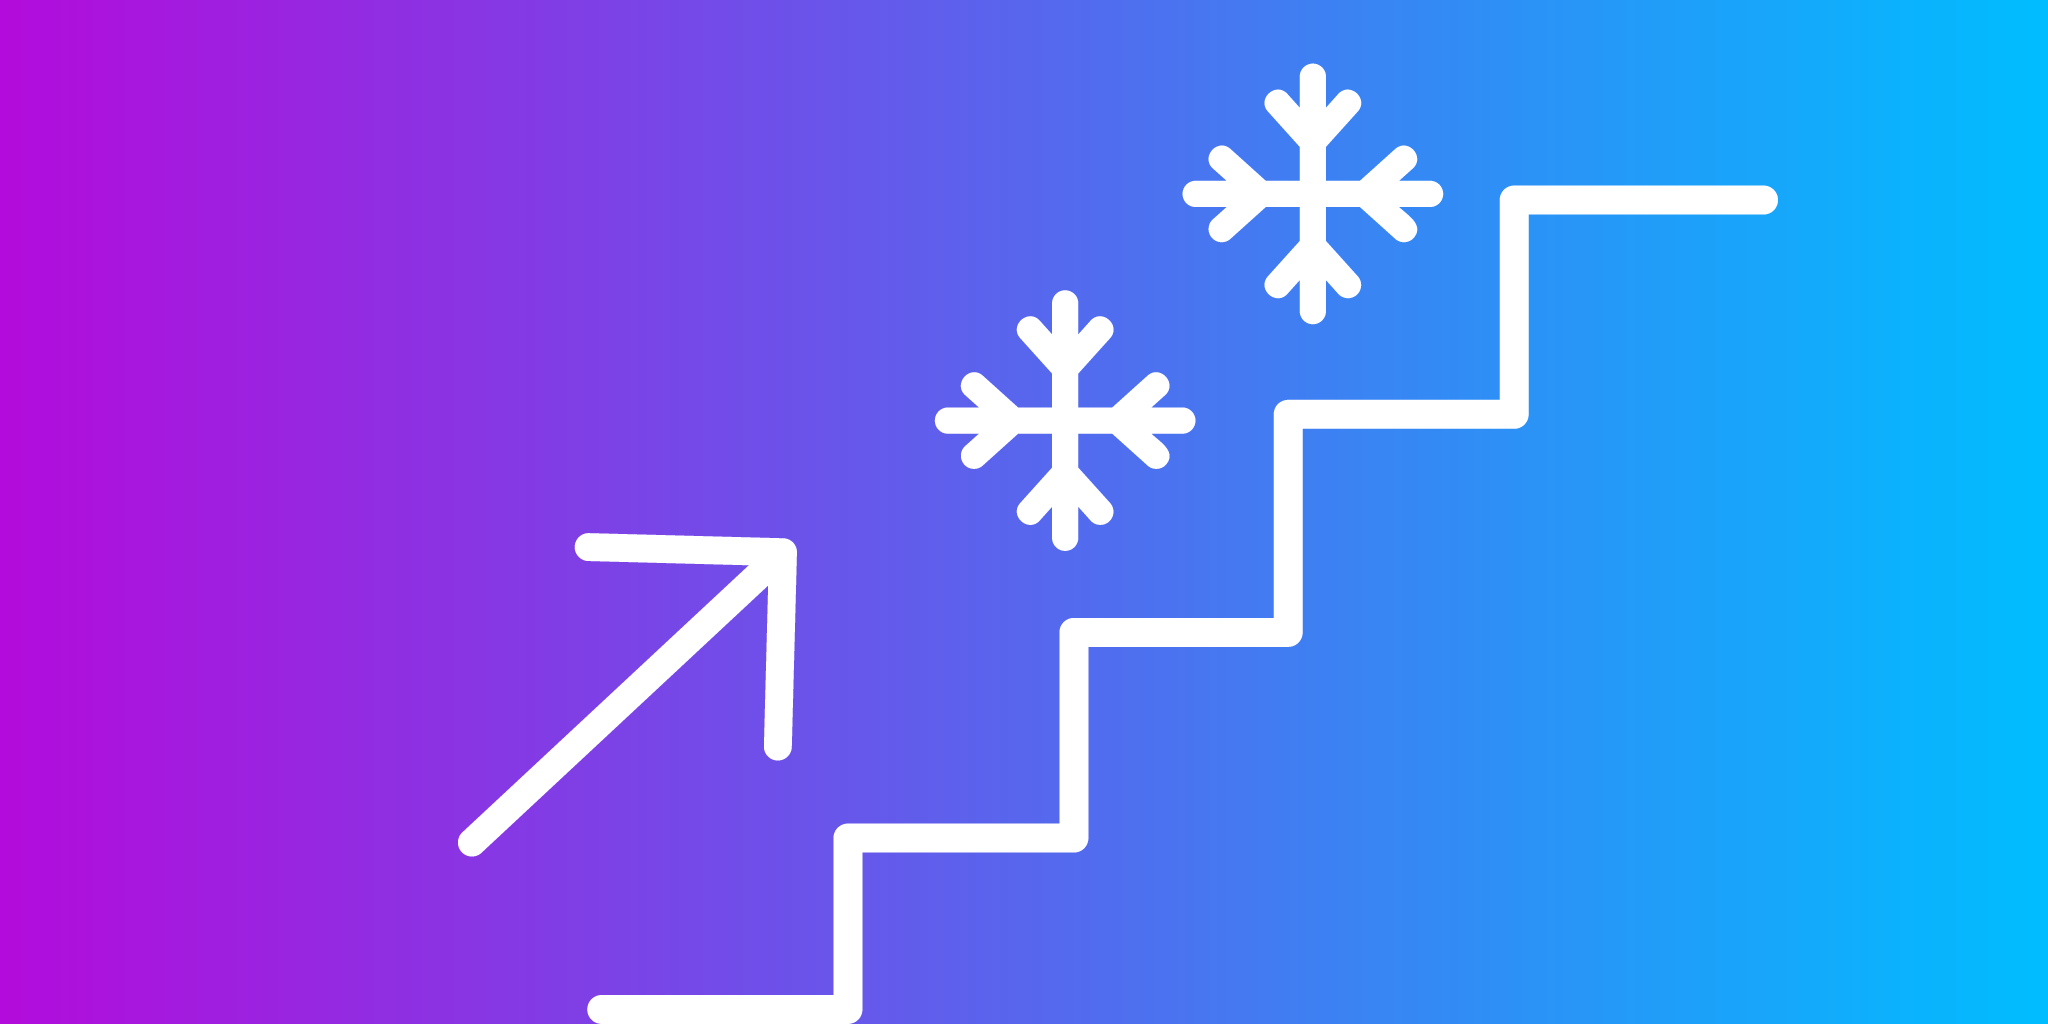 blue and purple image with snowflakes and an arrow pointing upward